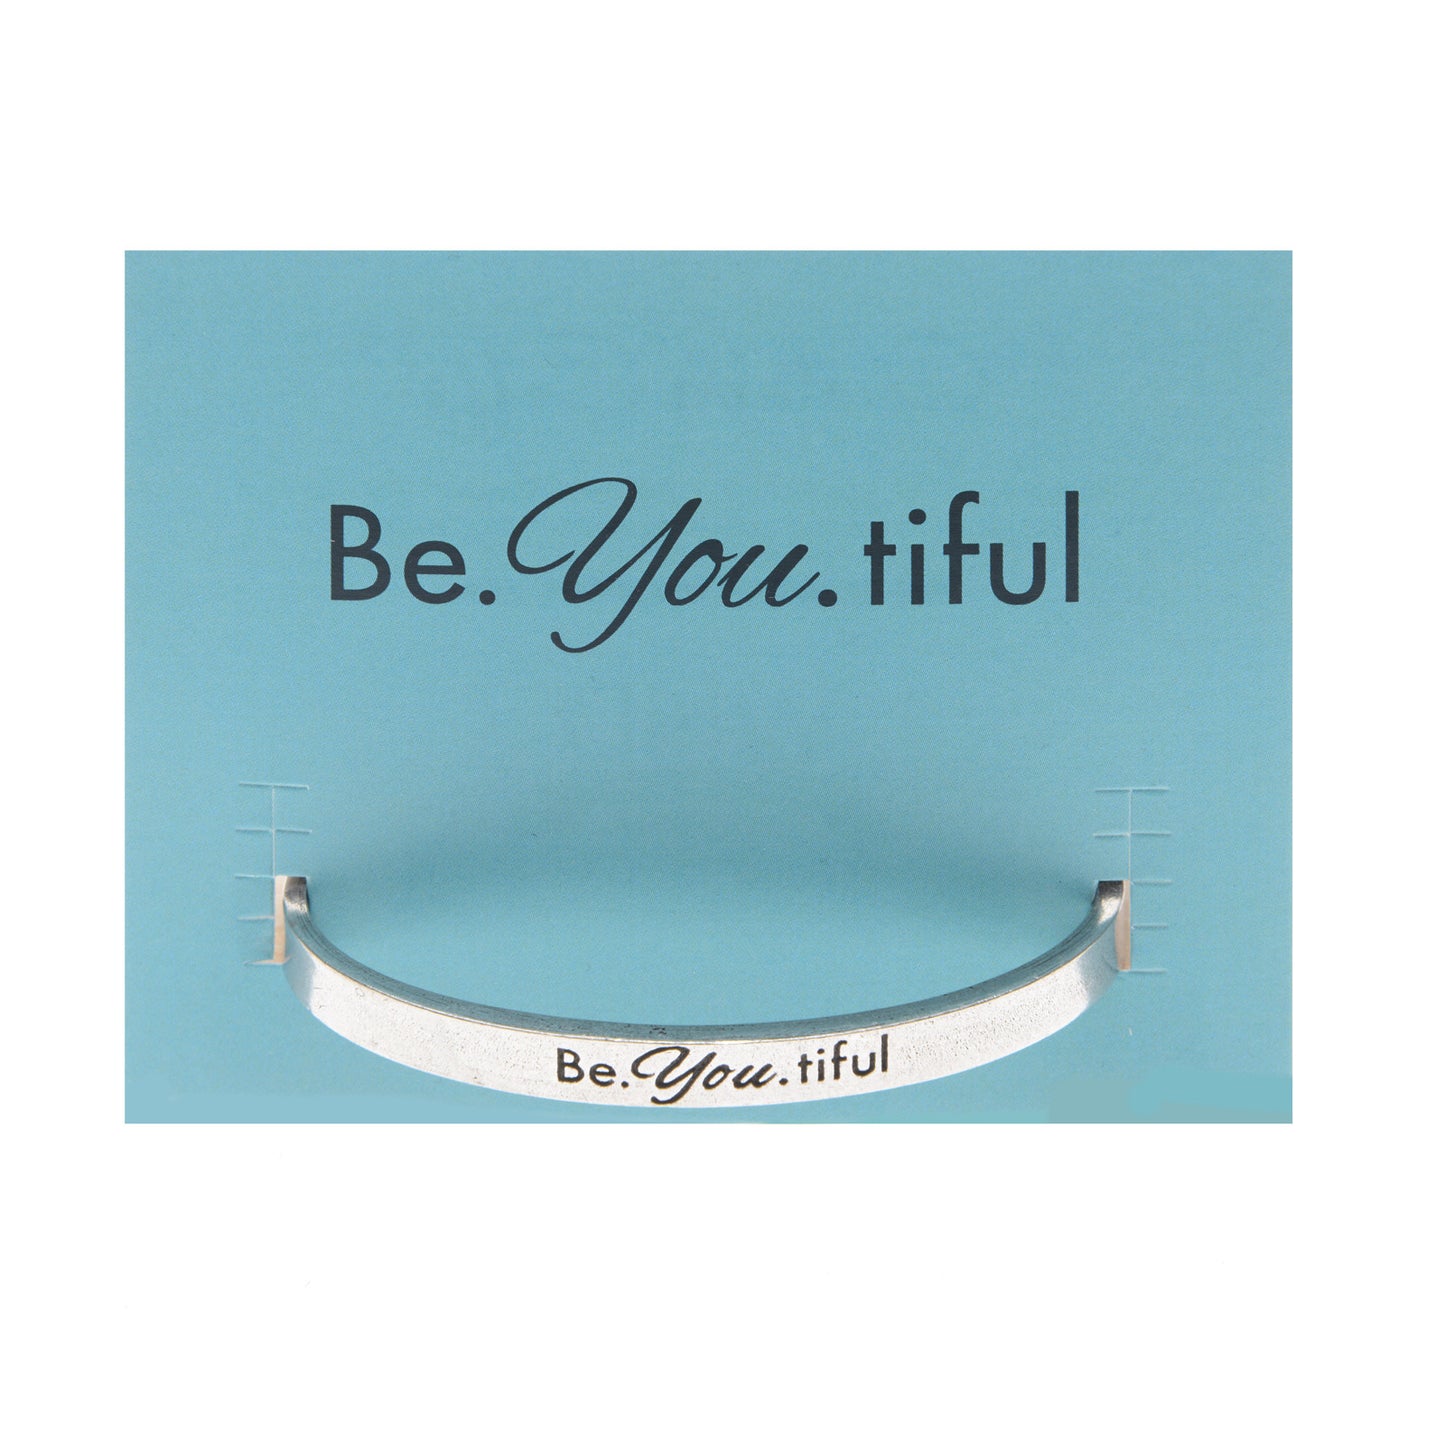 Be You tiful Quotable Cuff Bracelet on backer card